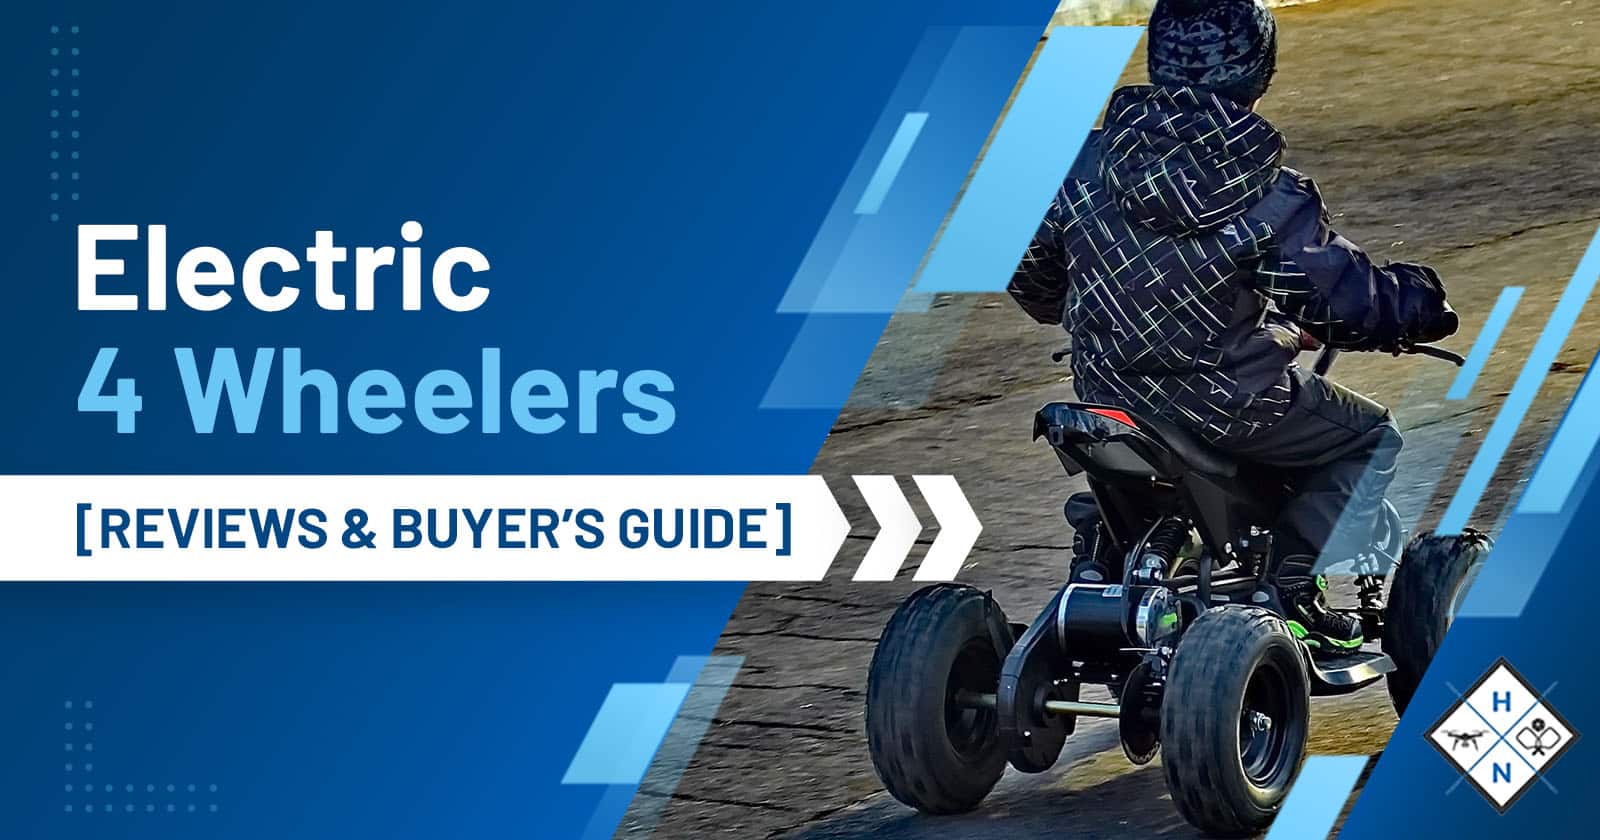 Electric 4 Wheelers [REVIEWS &#038; BUYER'S GUIDE]